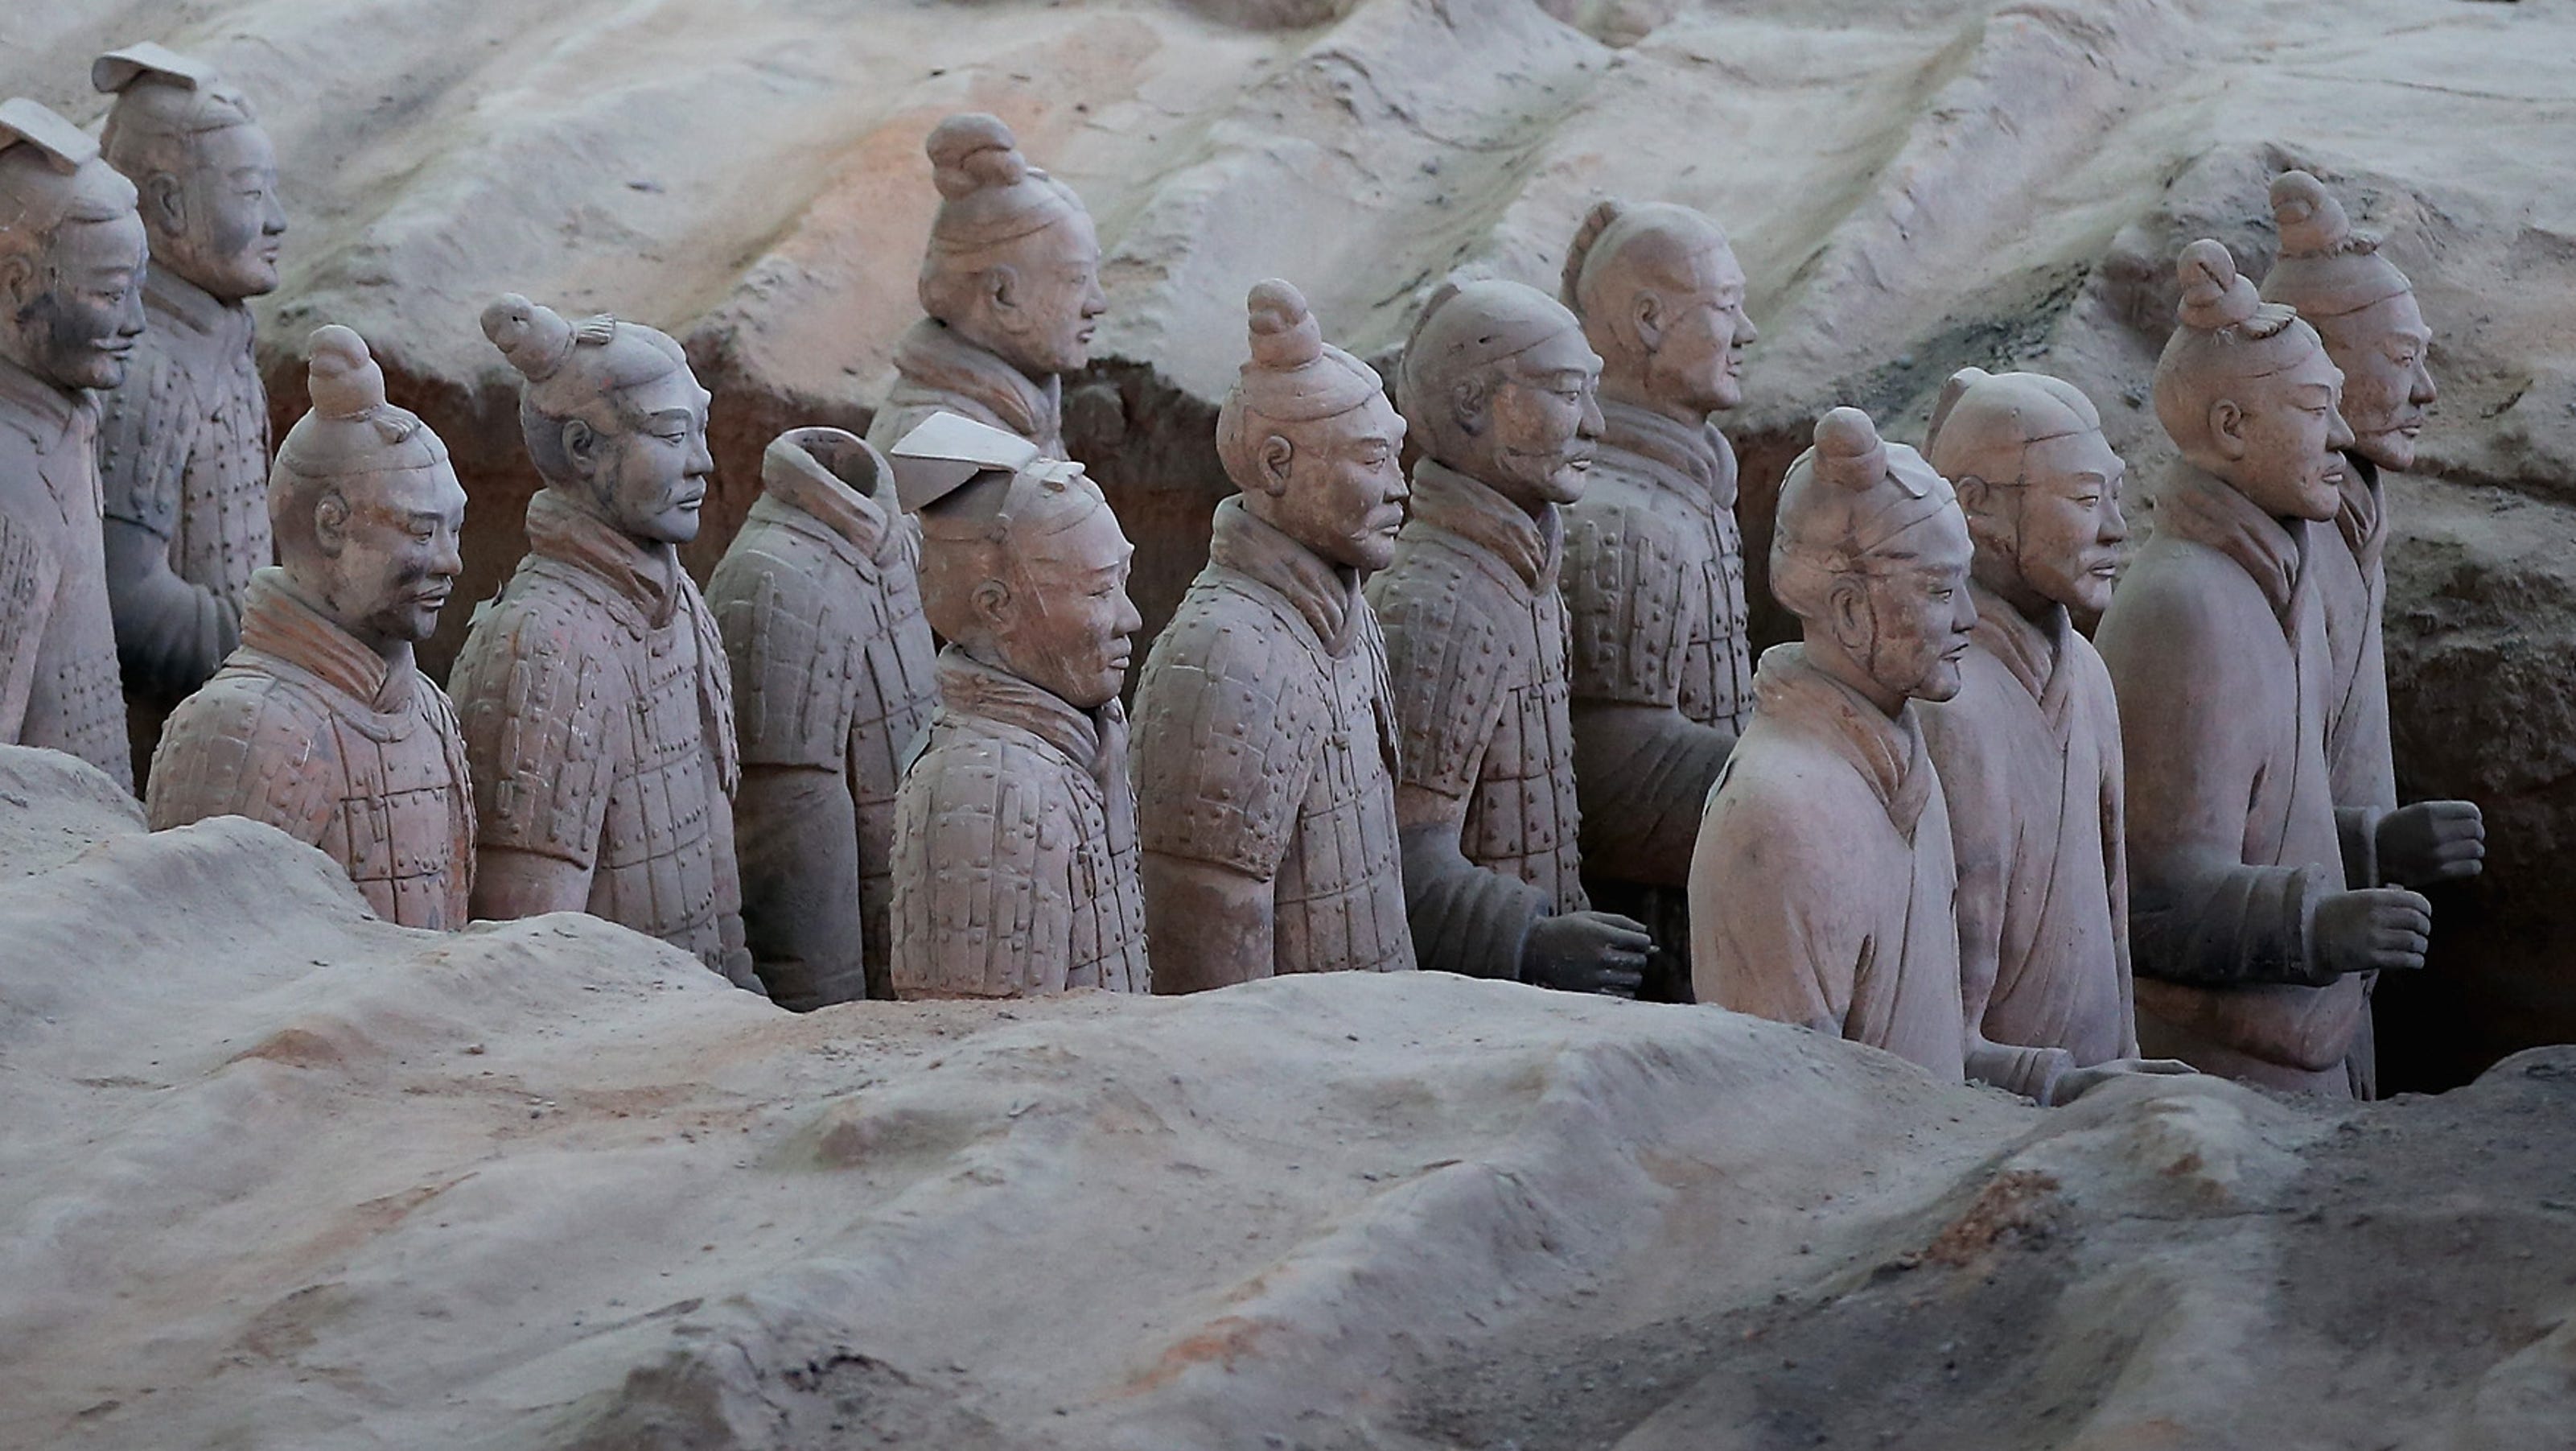 Mystery of China's Terracotta Army solved